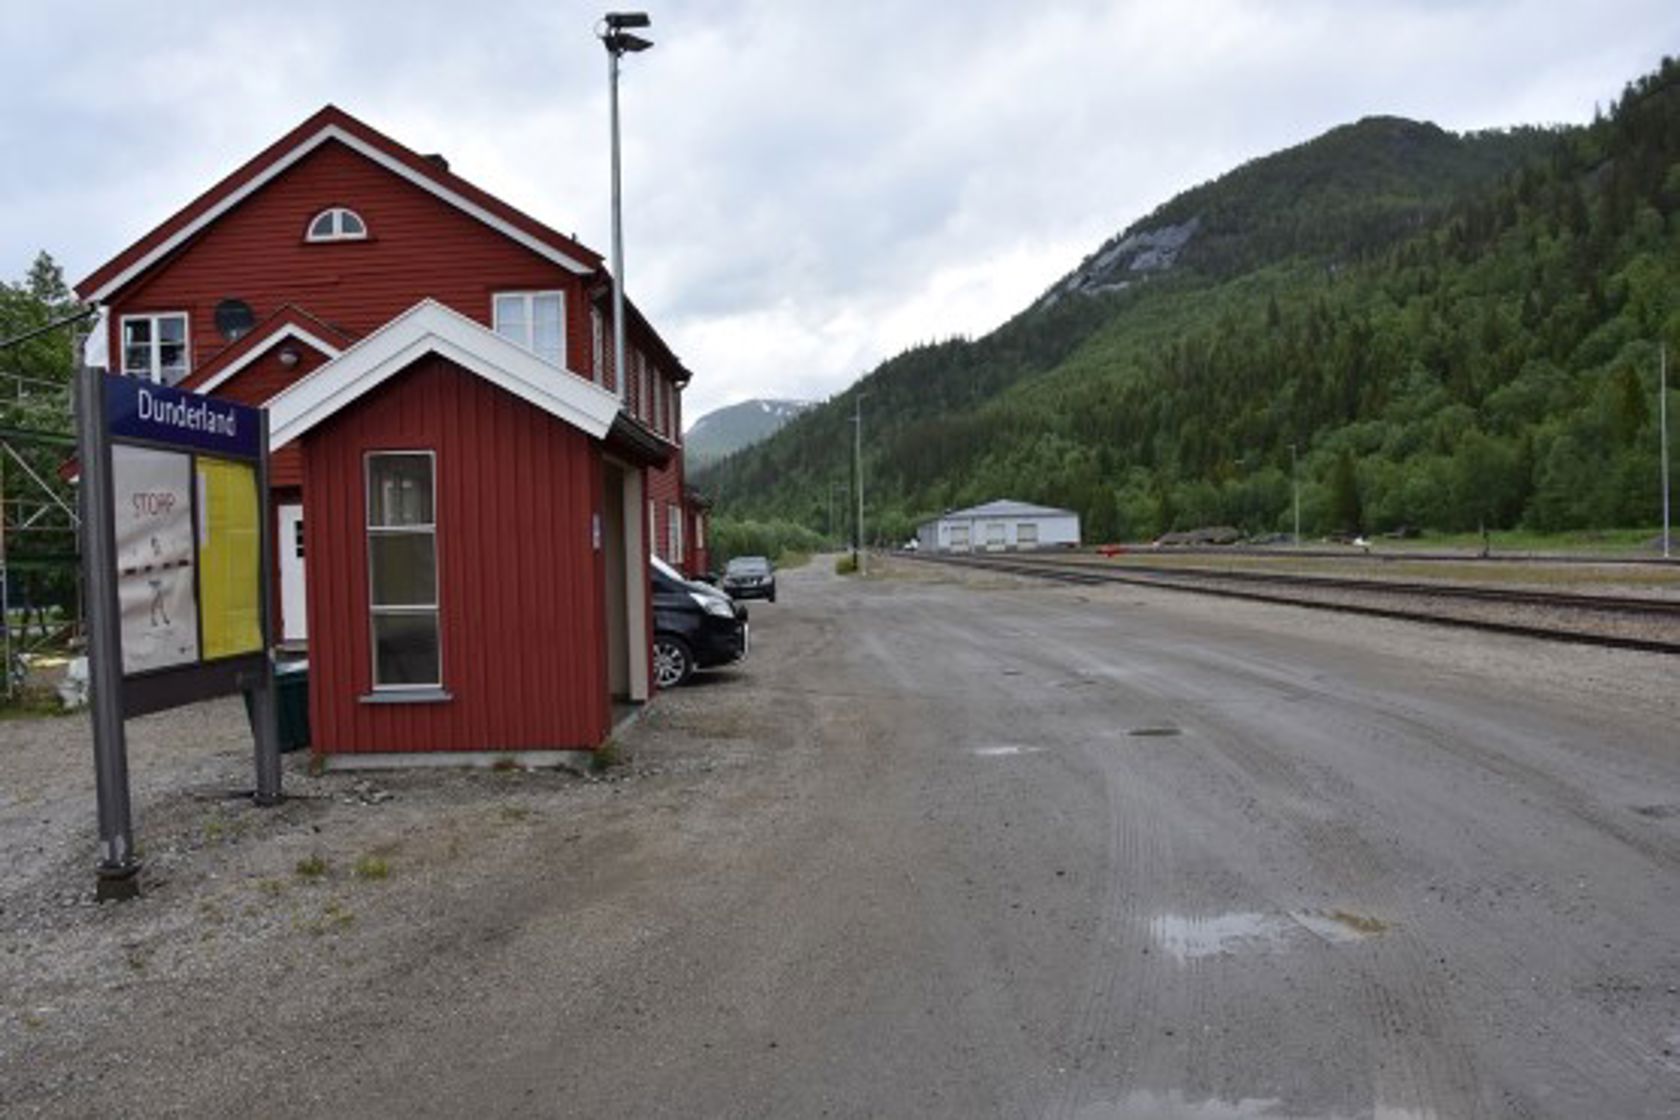 Exteriore view of Dunderland station